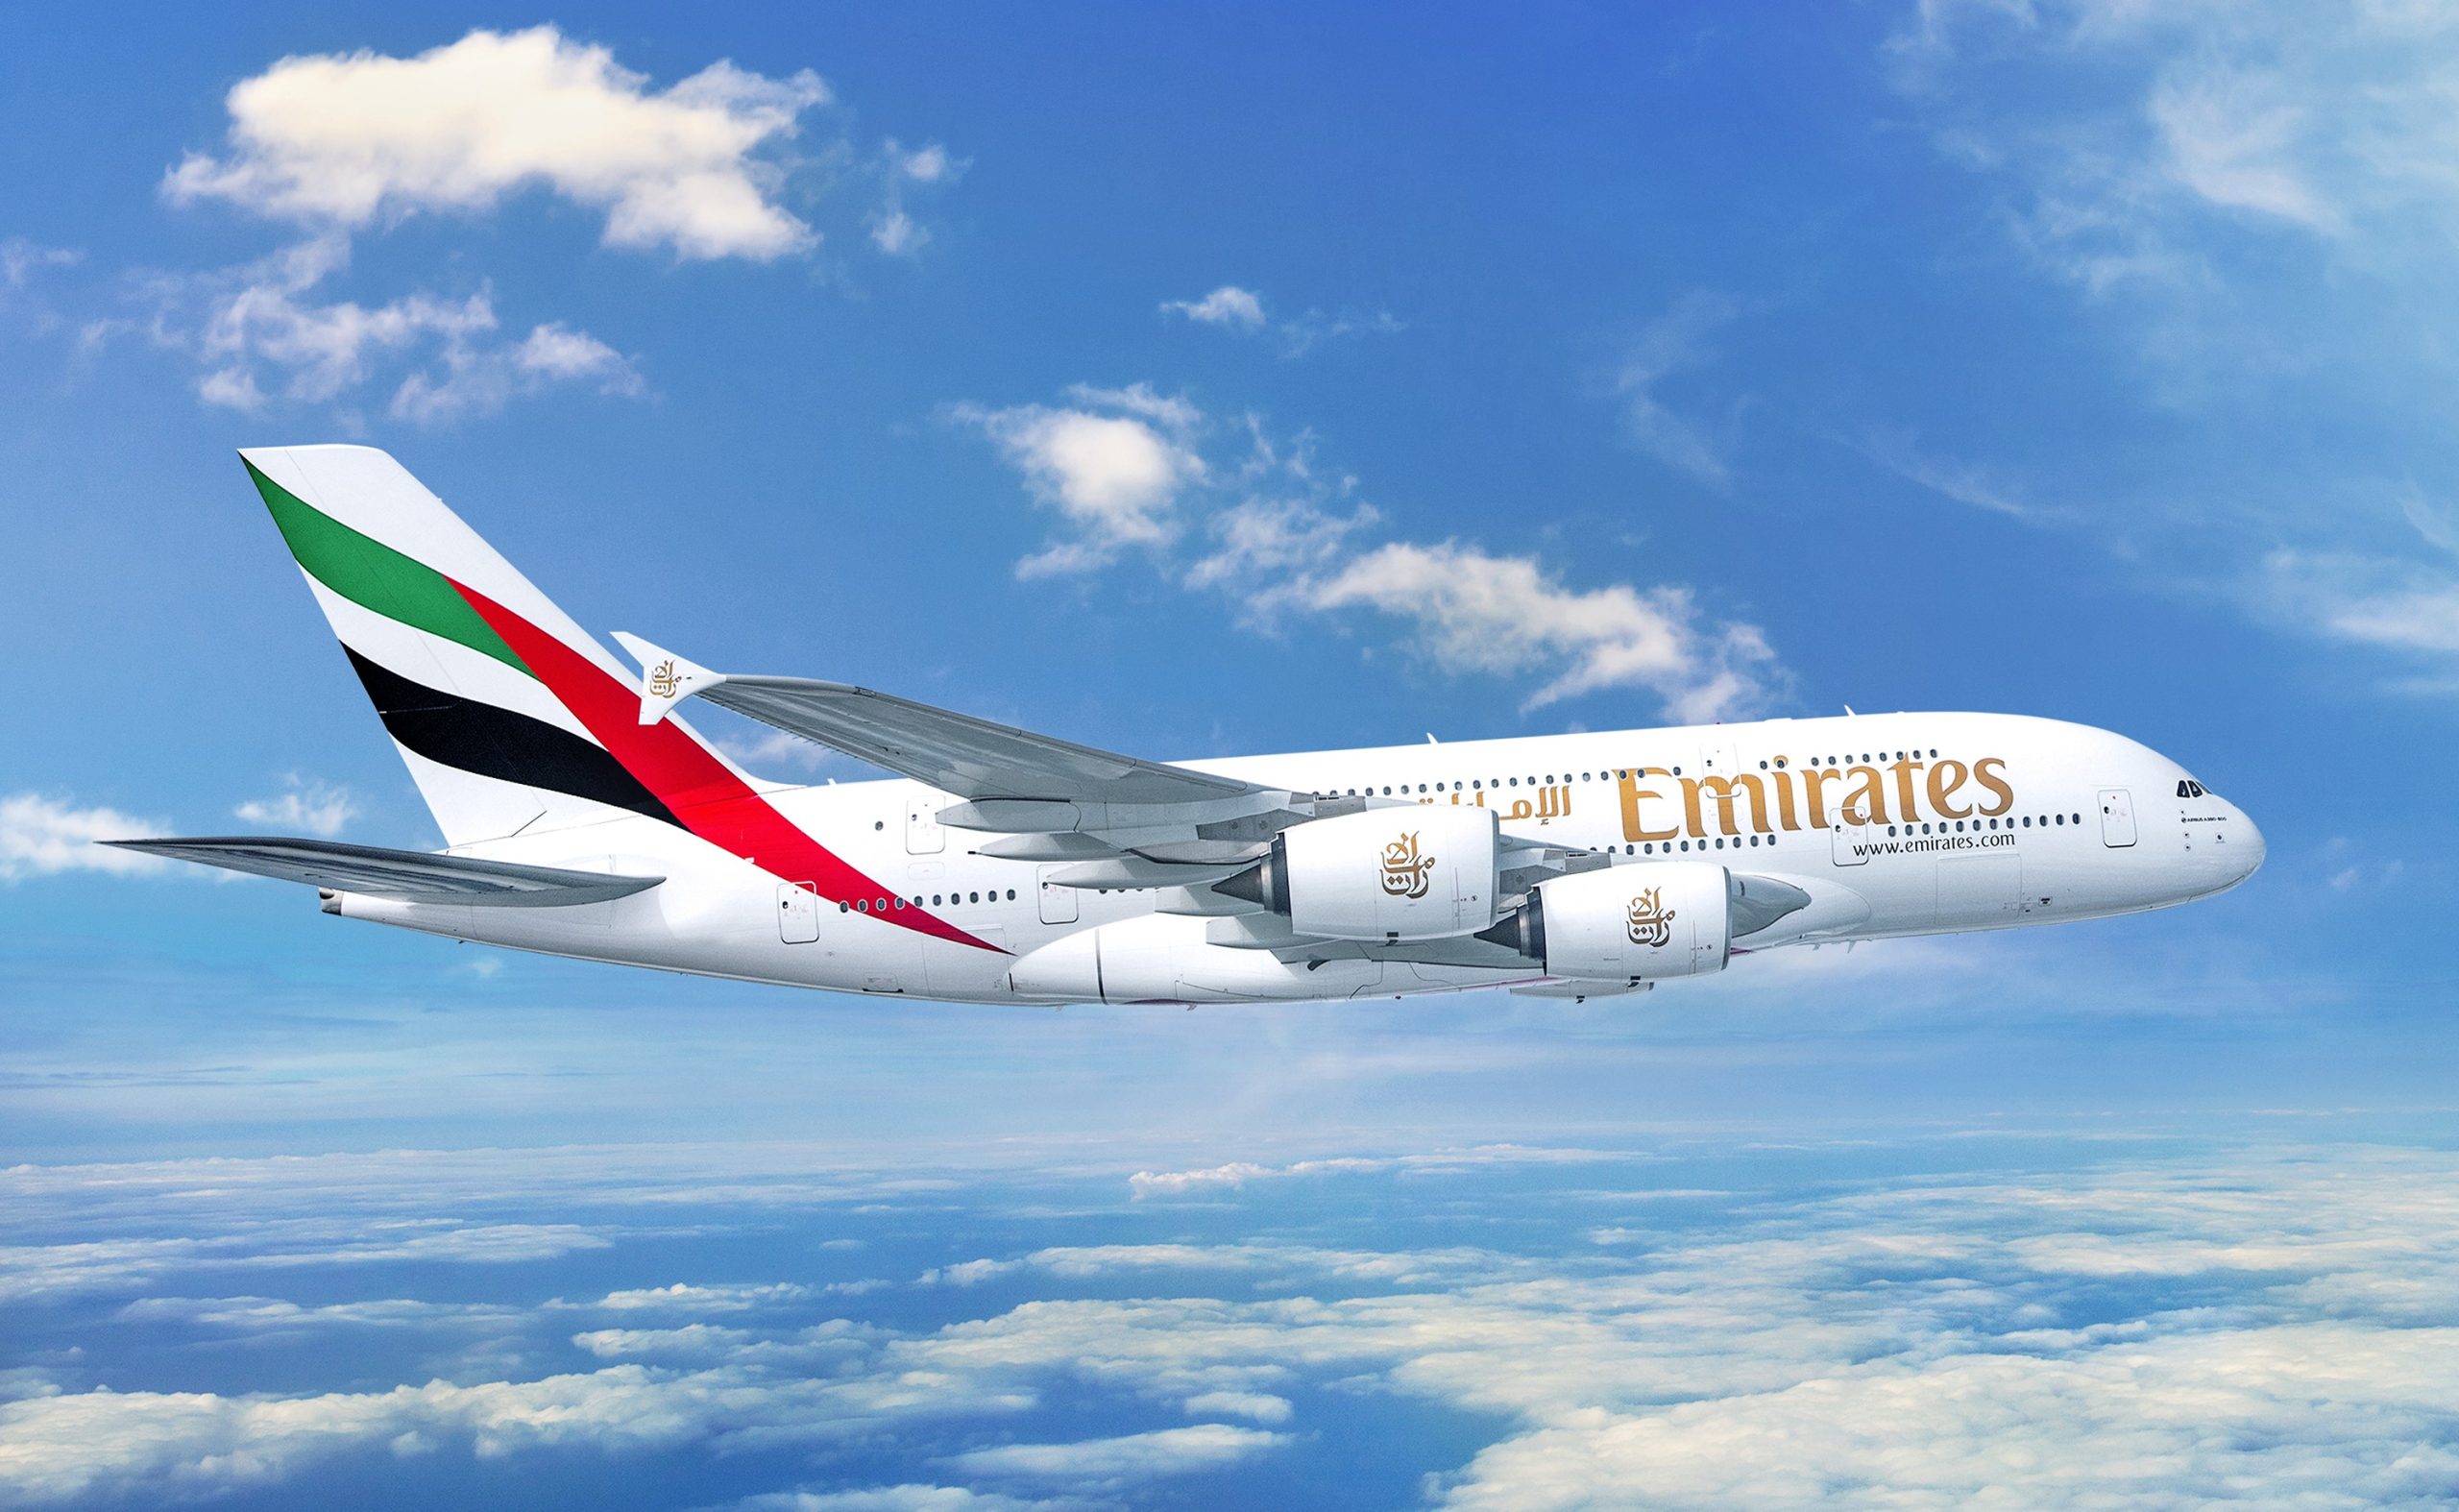 Emirates launches first A380 service to Bali